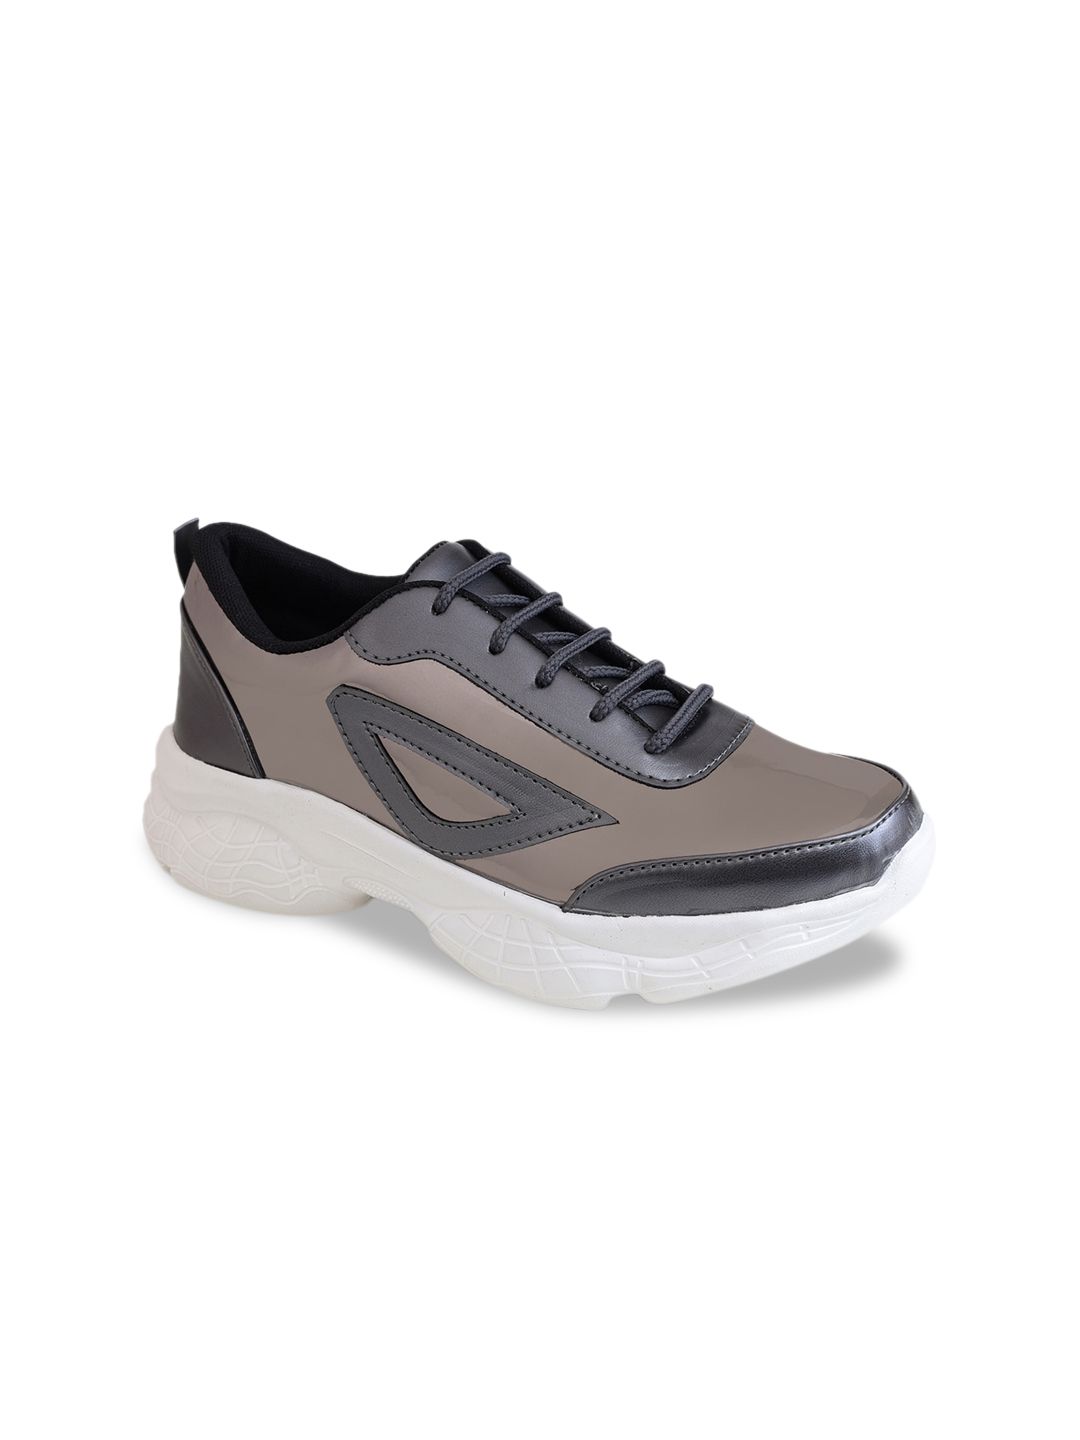 TRASE Women Grey Colourblocked Sneakers Price in India